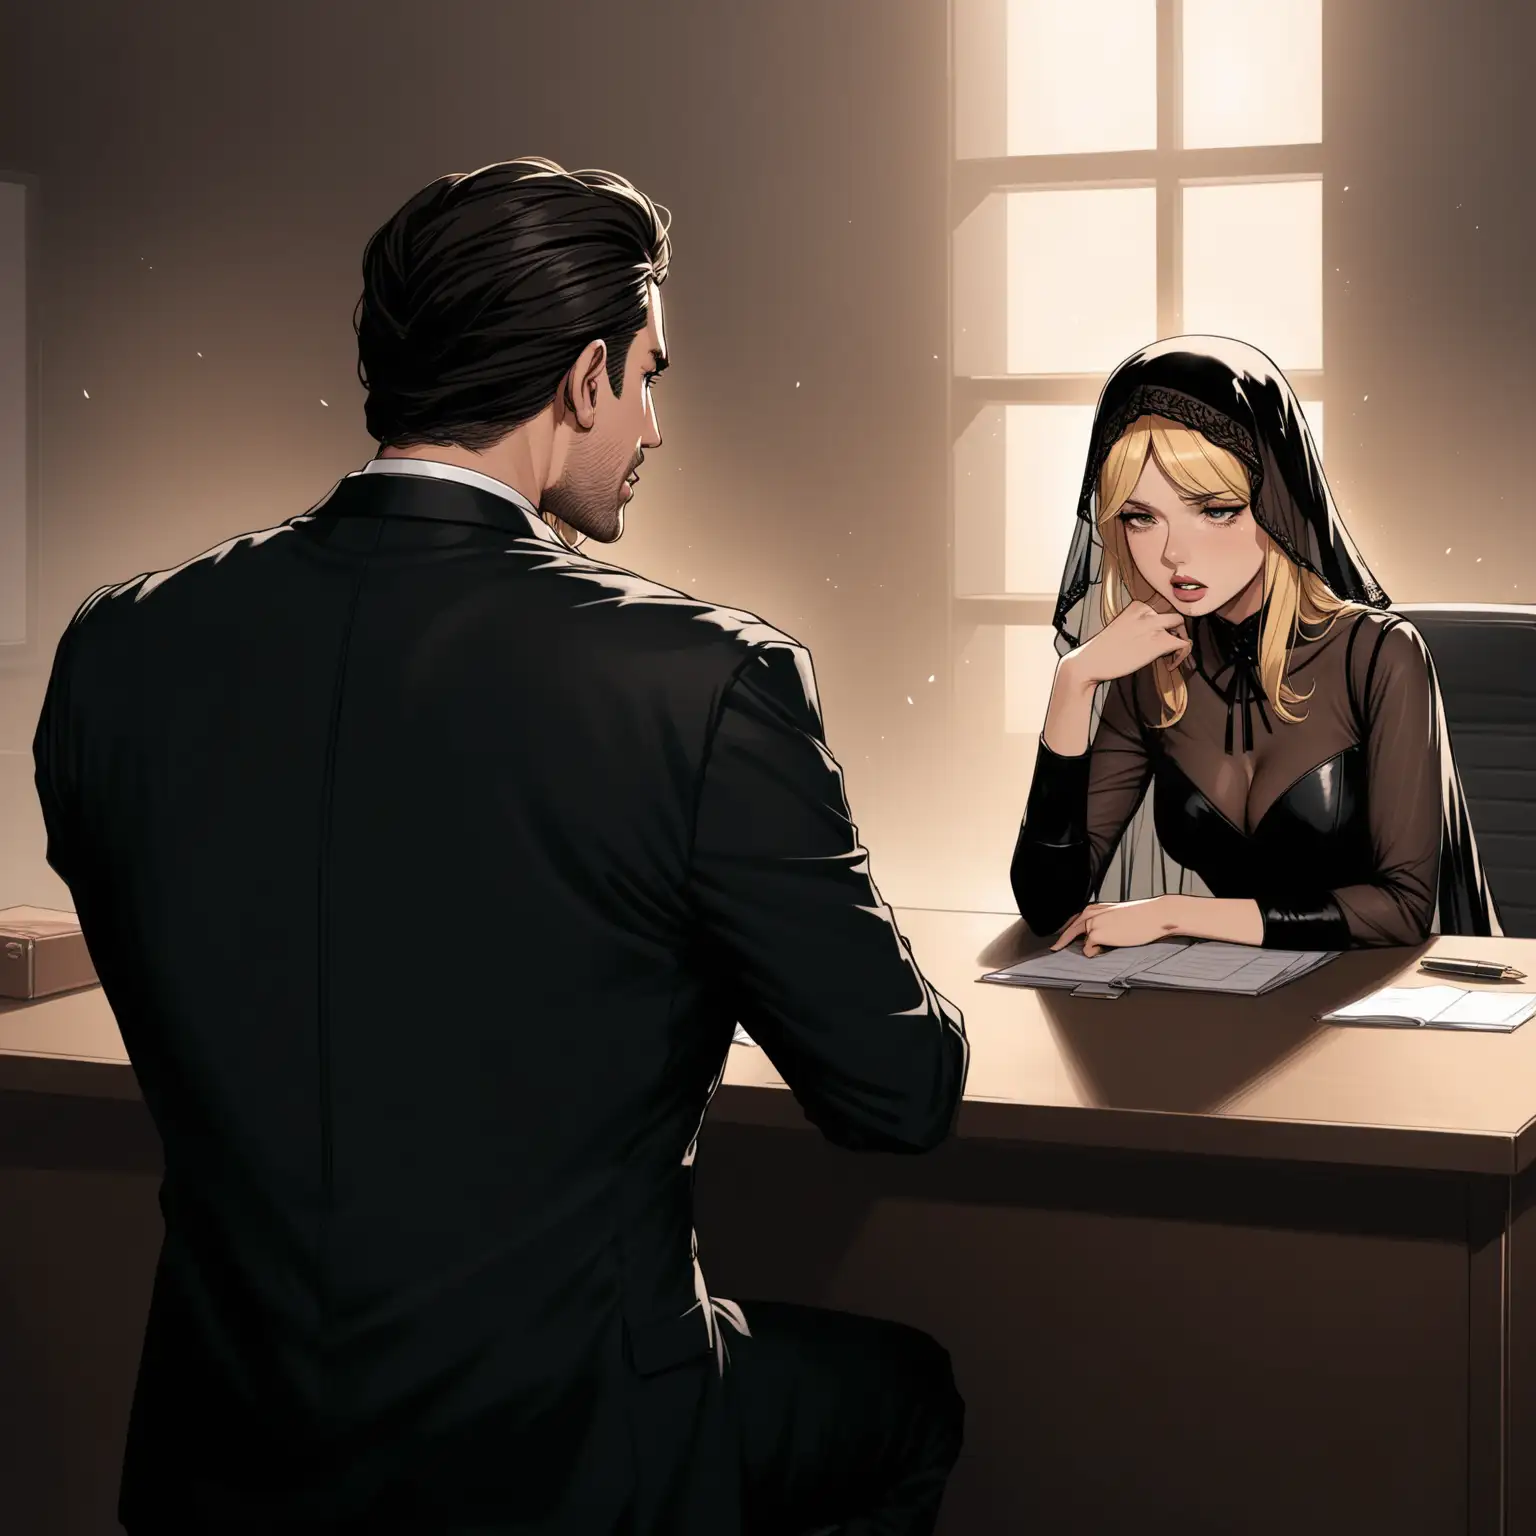 A full body of a A beautiful blonde woman with full lips her facial expression is devastated. She wears a black small pin hat with a short black veil and a leather and sheer black dress. She demands answers. A man sits across from her. He wears a black suit and sits calmly at his desk